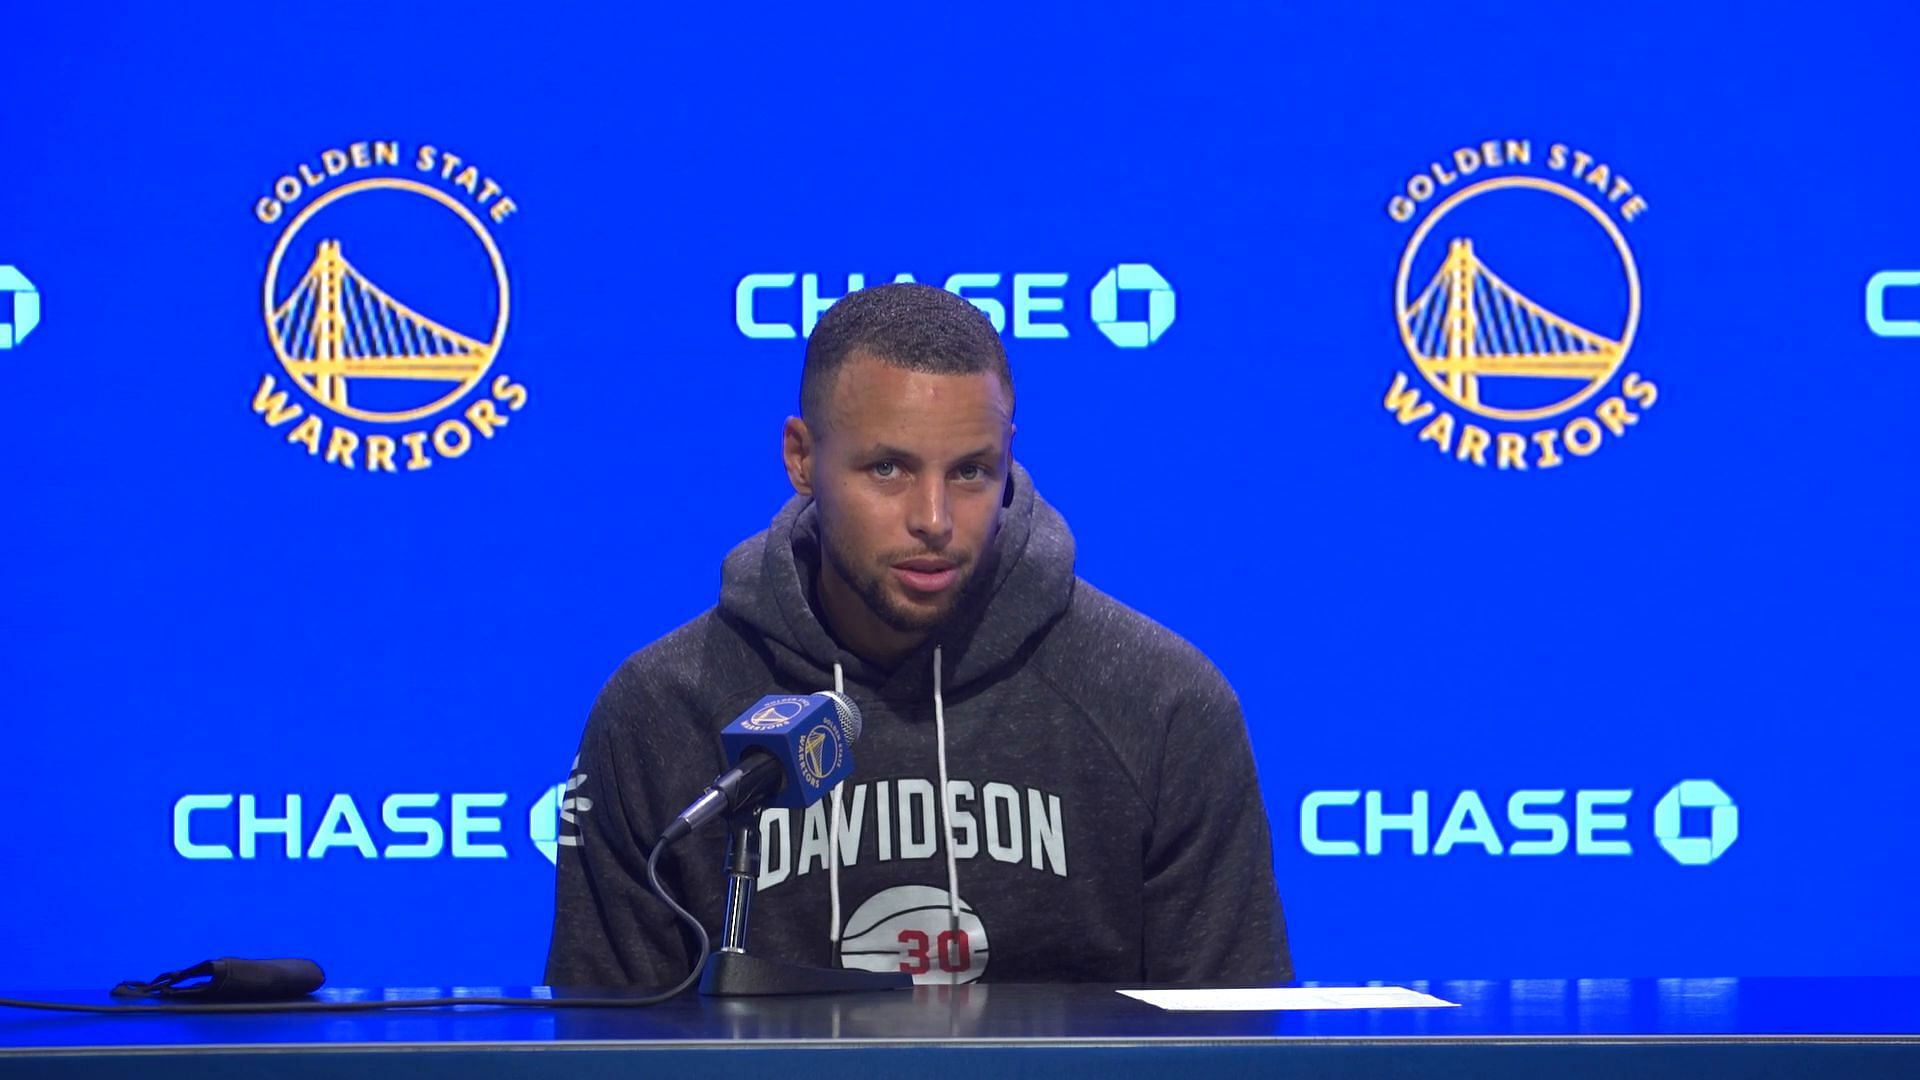 Stephen Curry speaking at a postgame press conference with Chase in the backdrop.